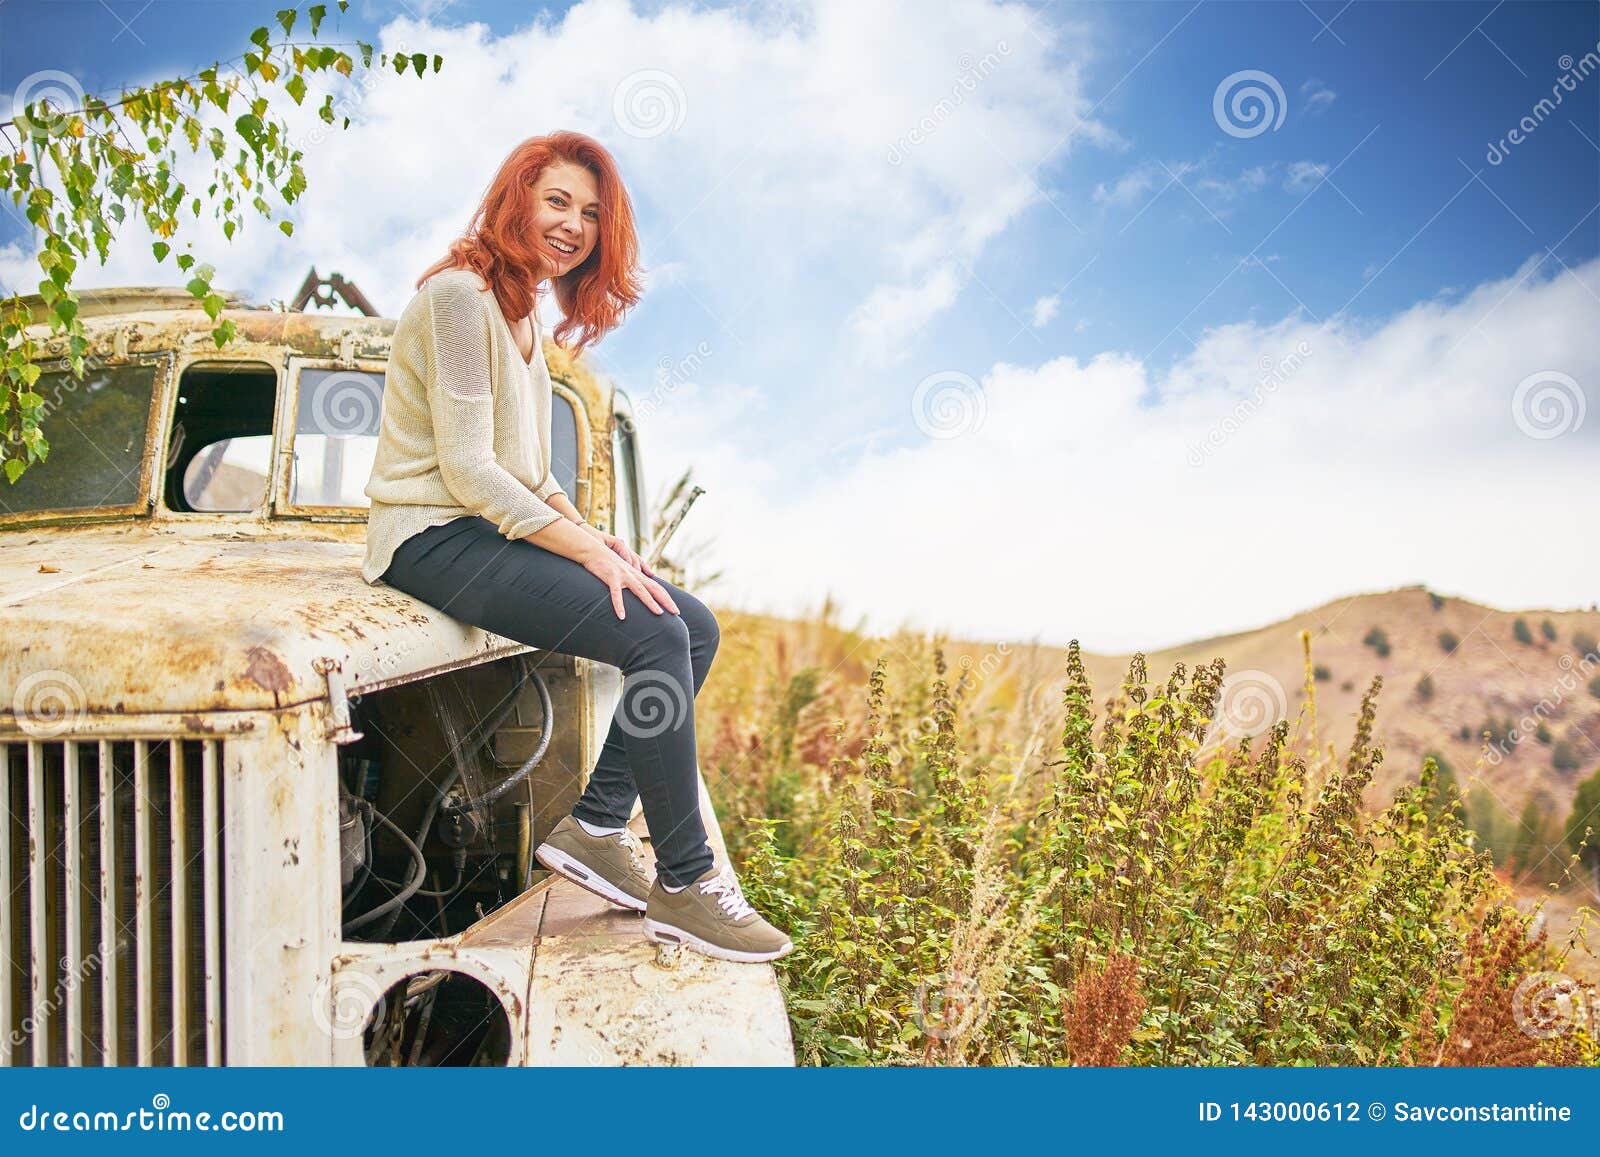 Old rusty trucks and girls